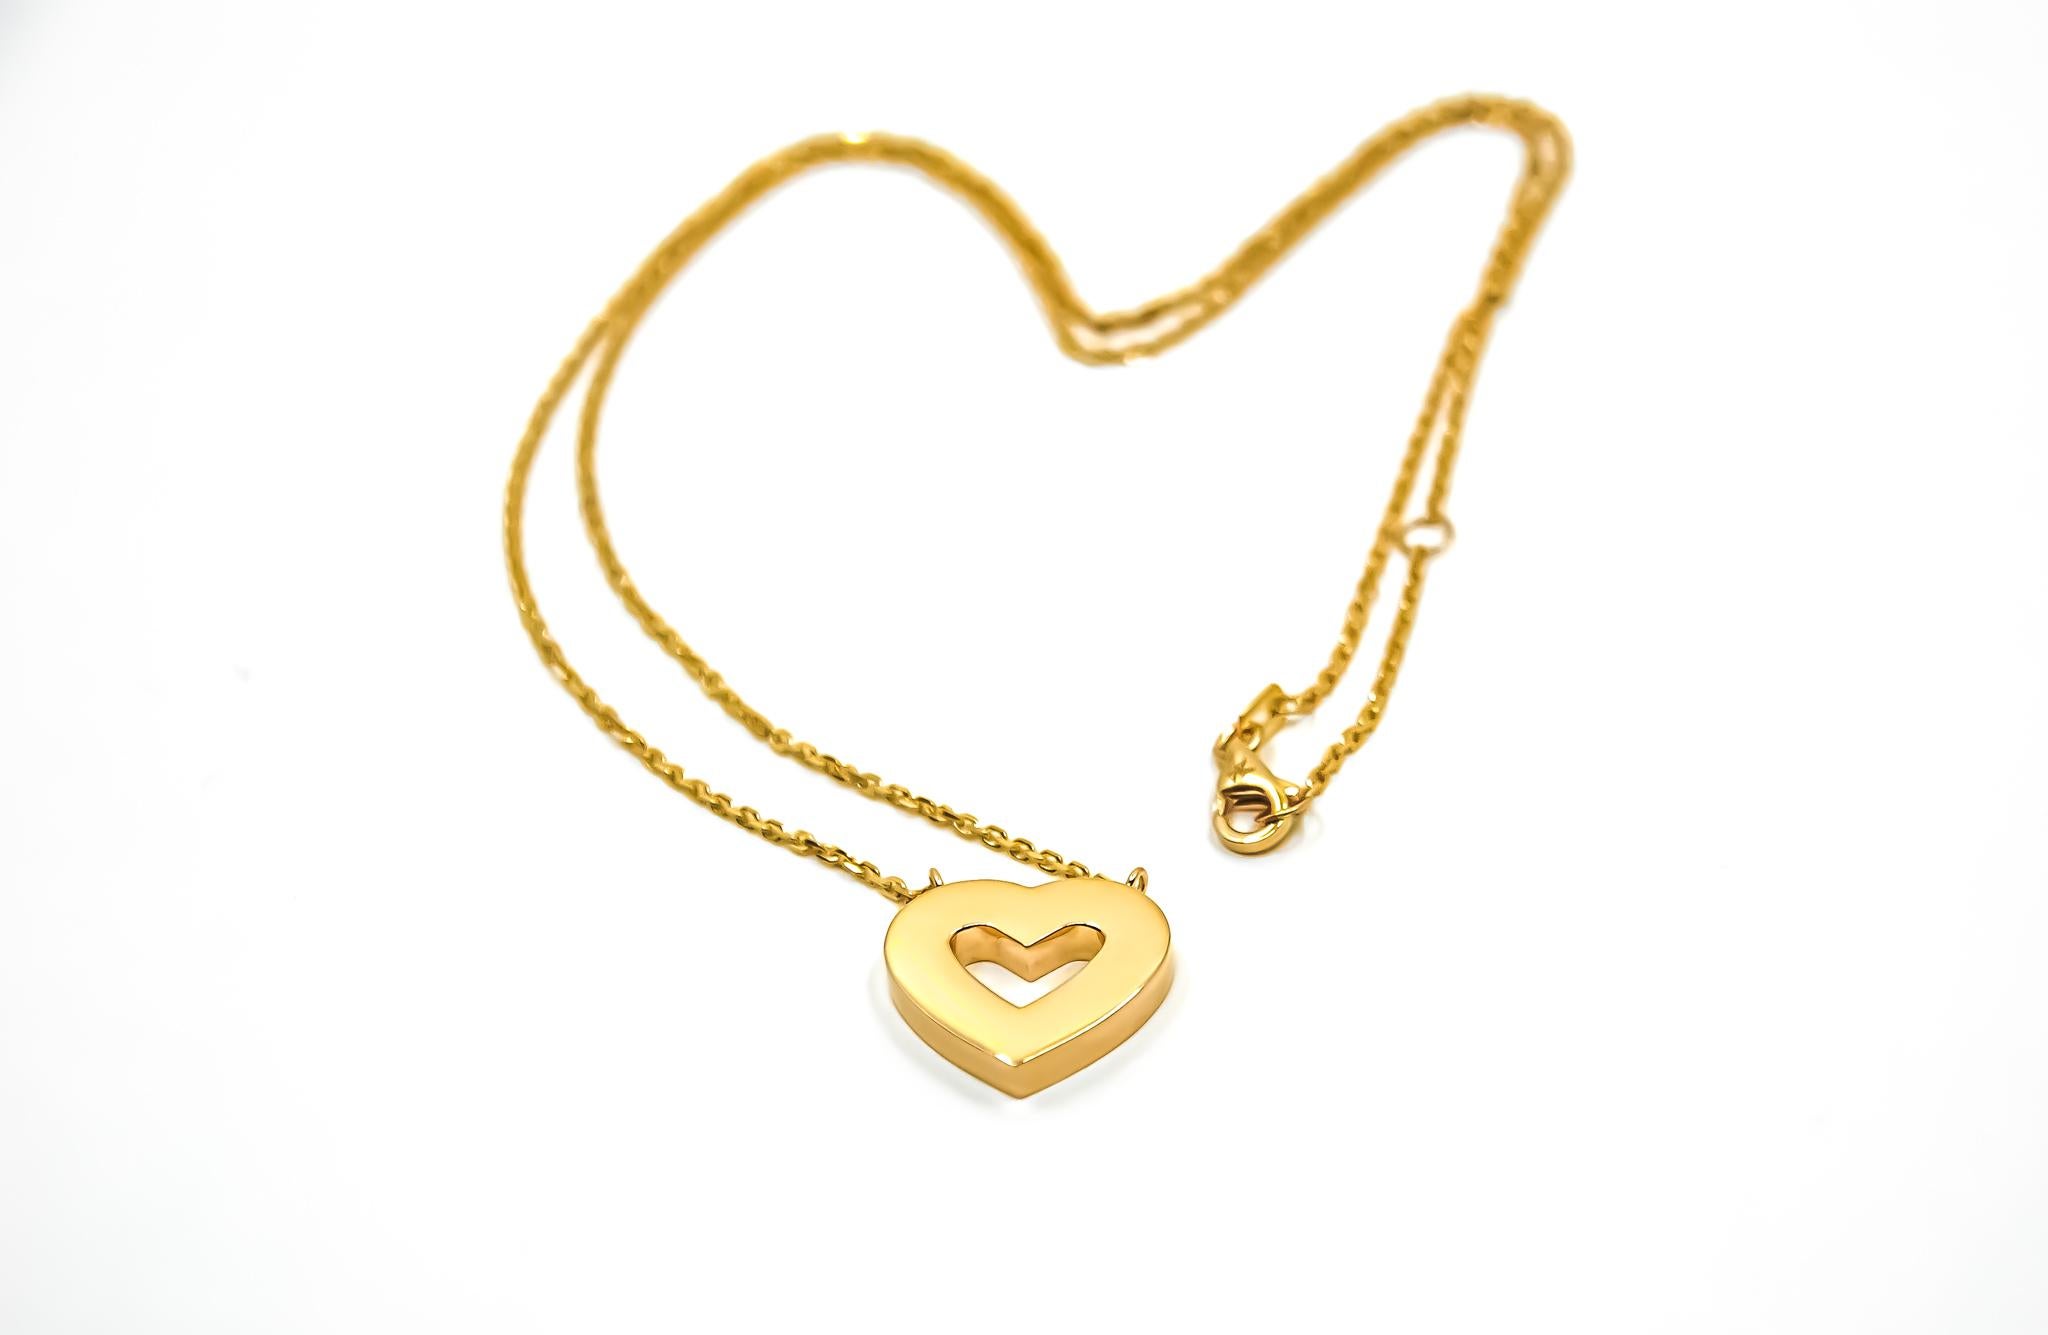 Romantic Heart Pendant Necklace in 18kt Gold For Sale